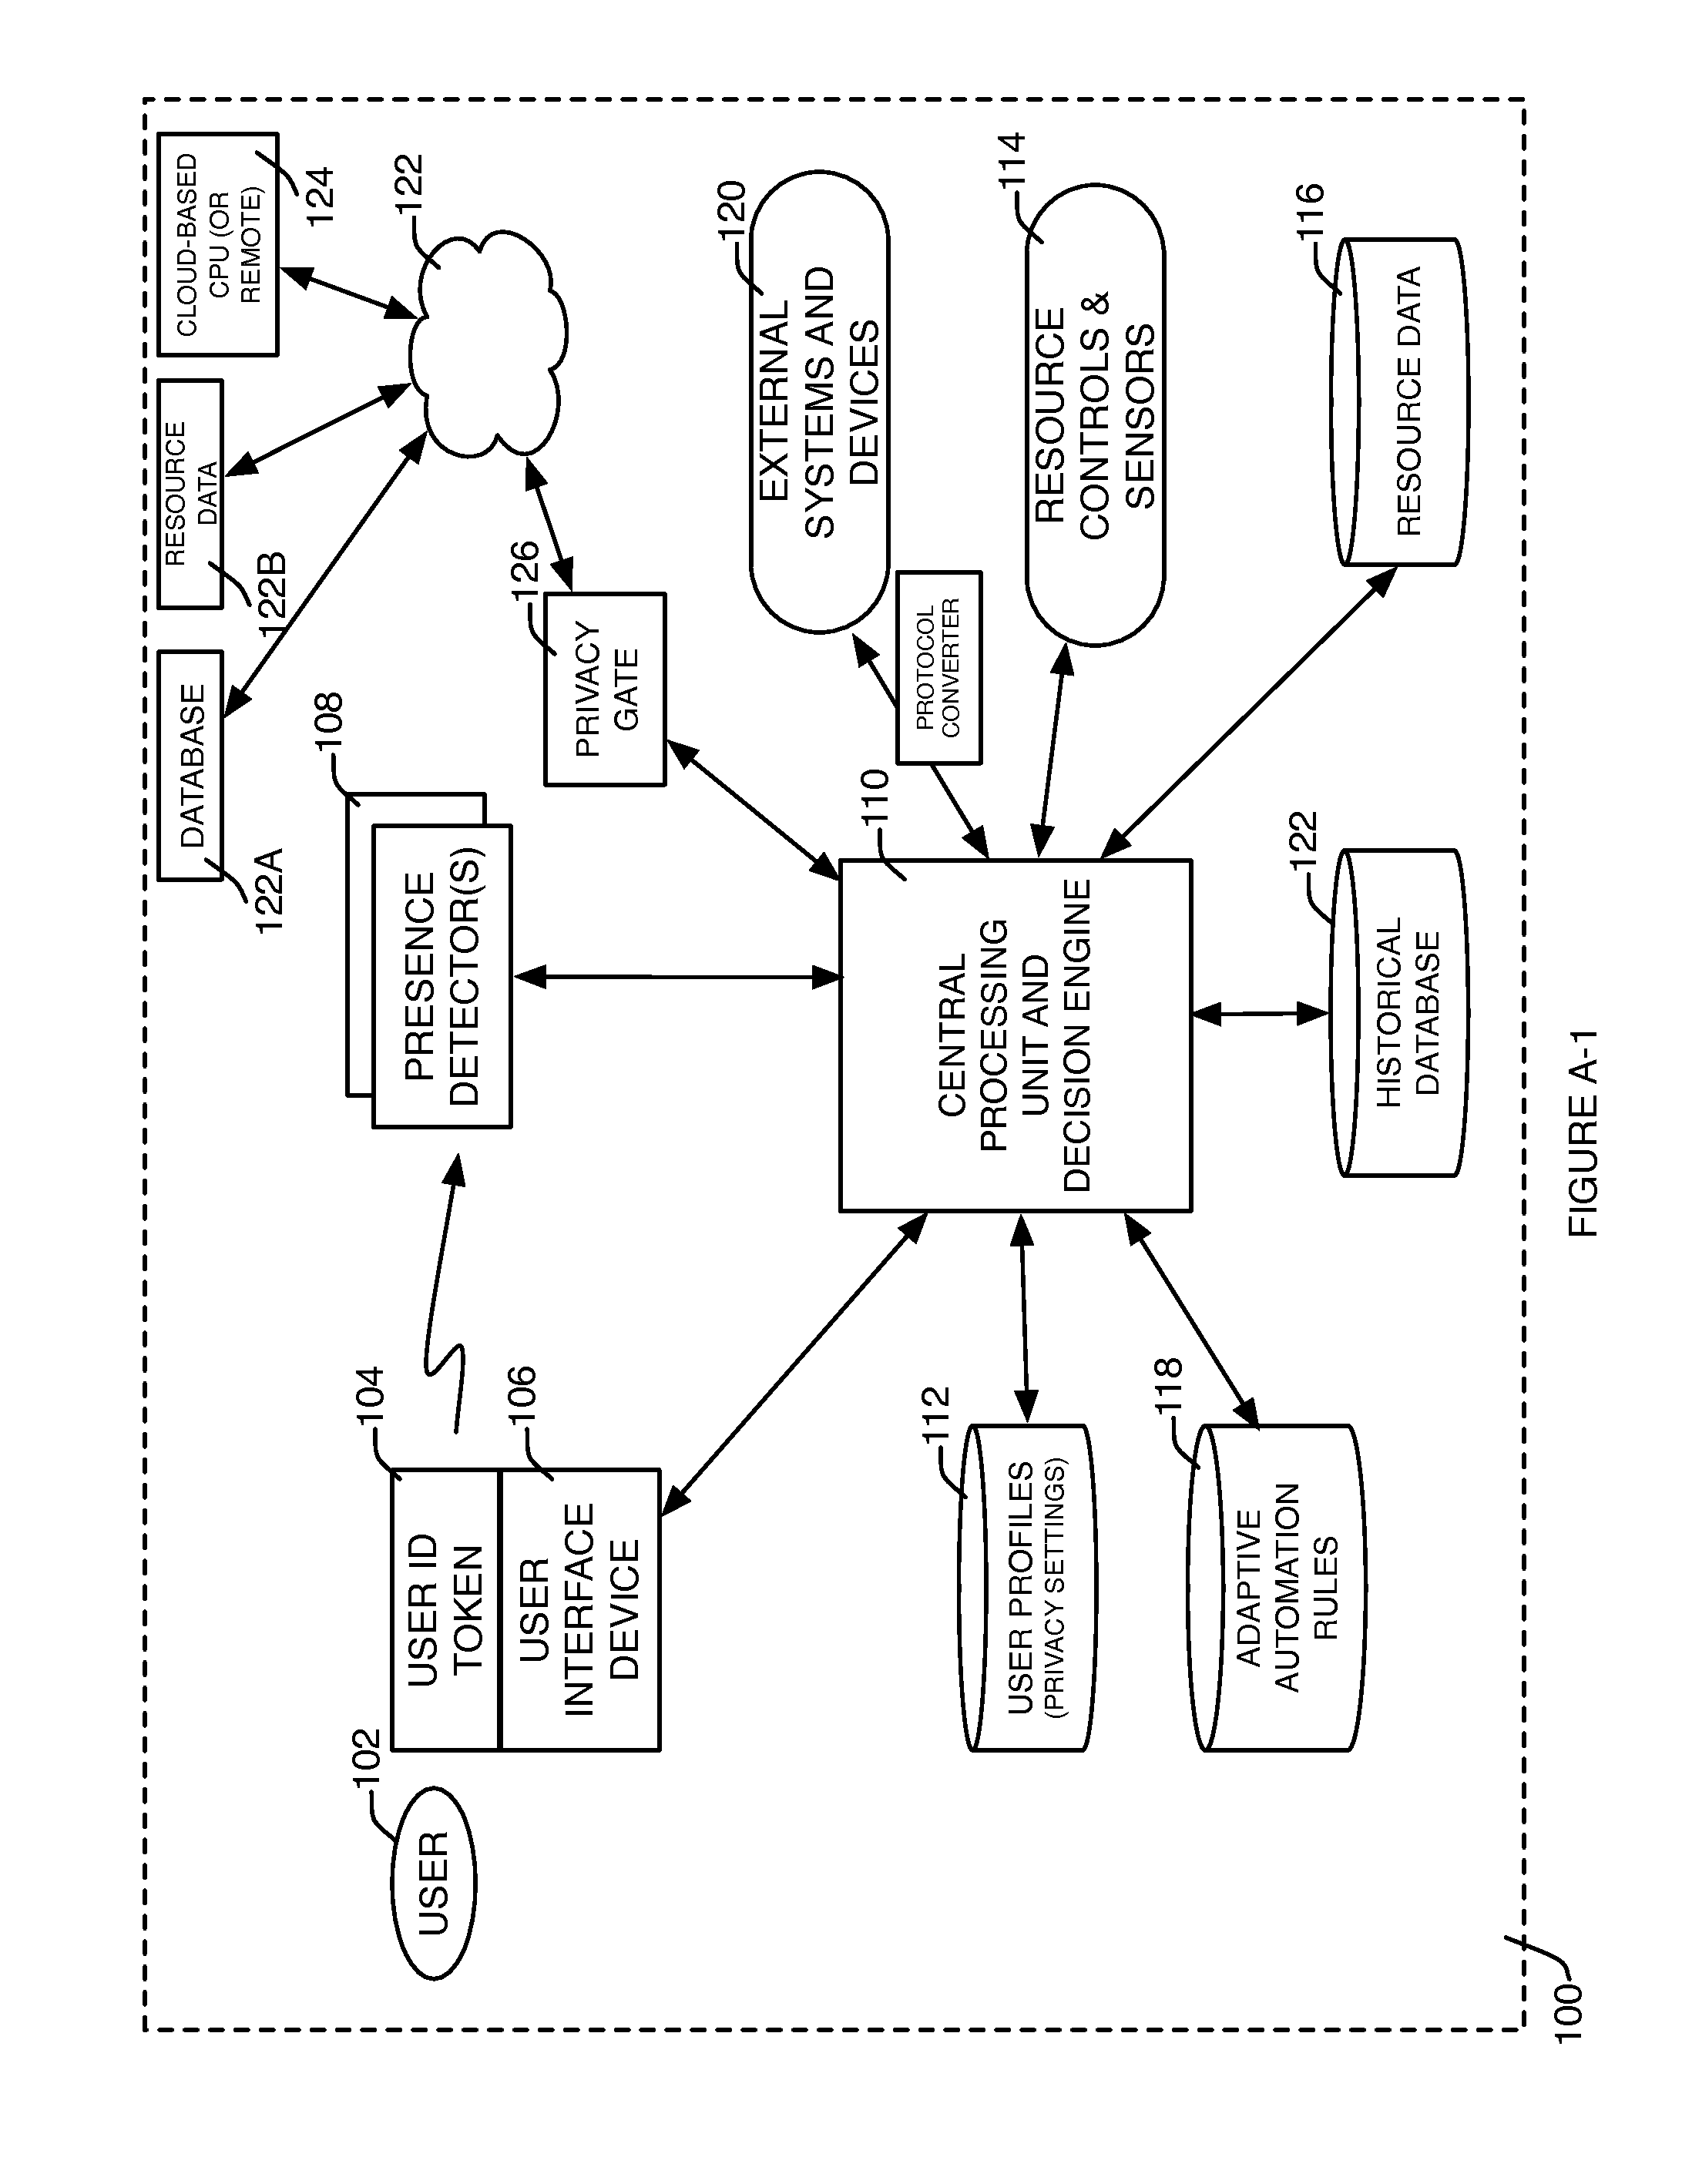 System and method for adaptive automated resource management and conservation